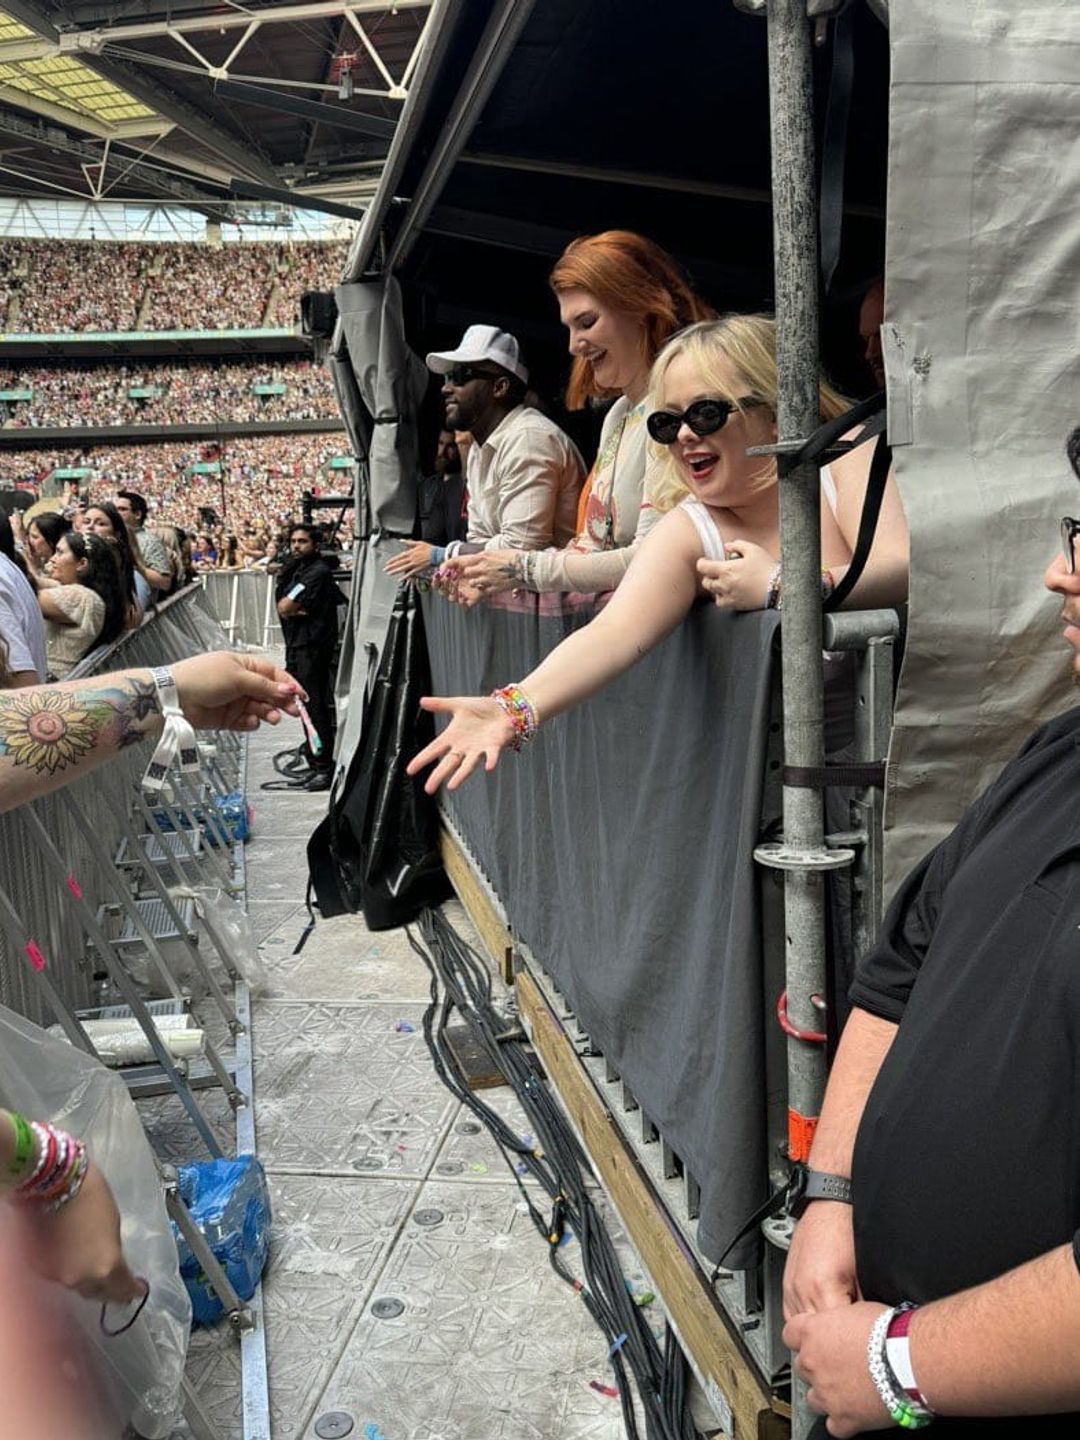 Nicola Coughlan reaches out to receive a bracelet at Taylor Swift's concert